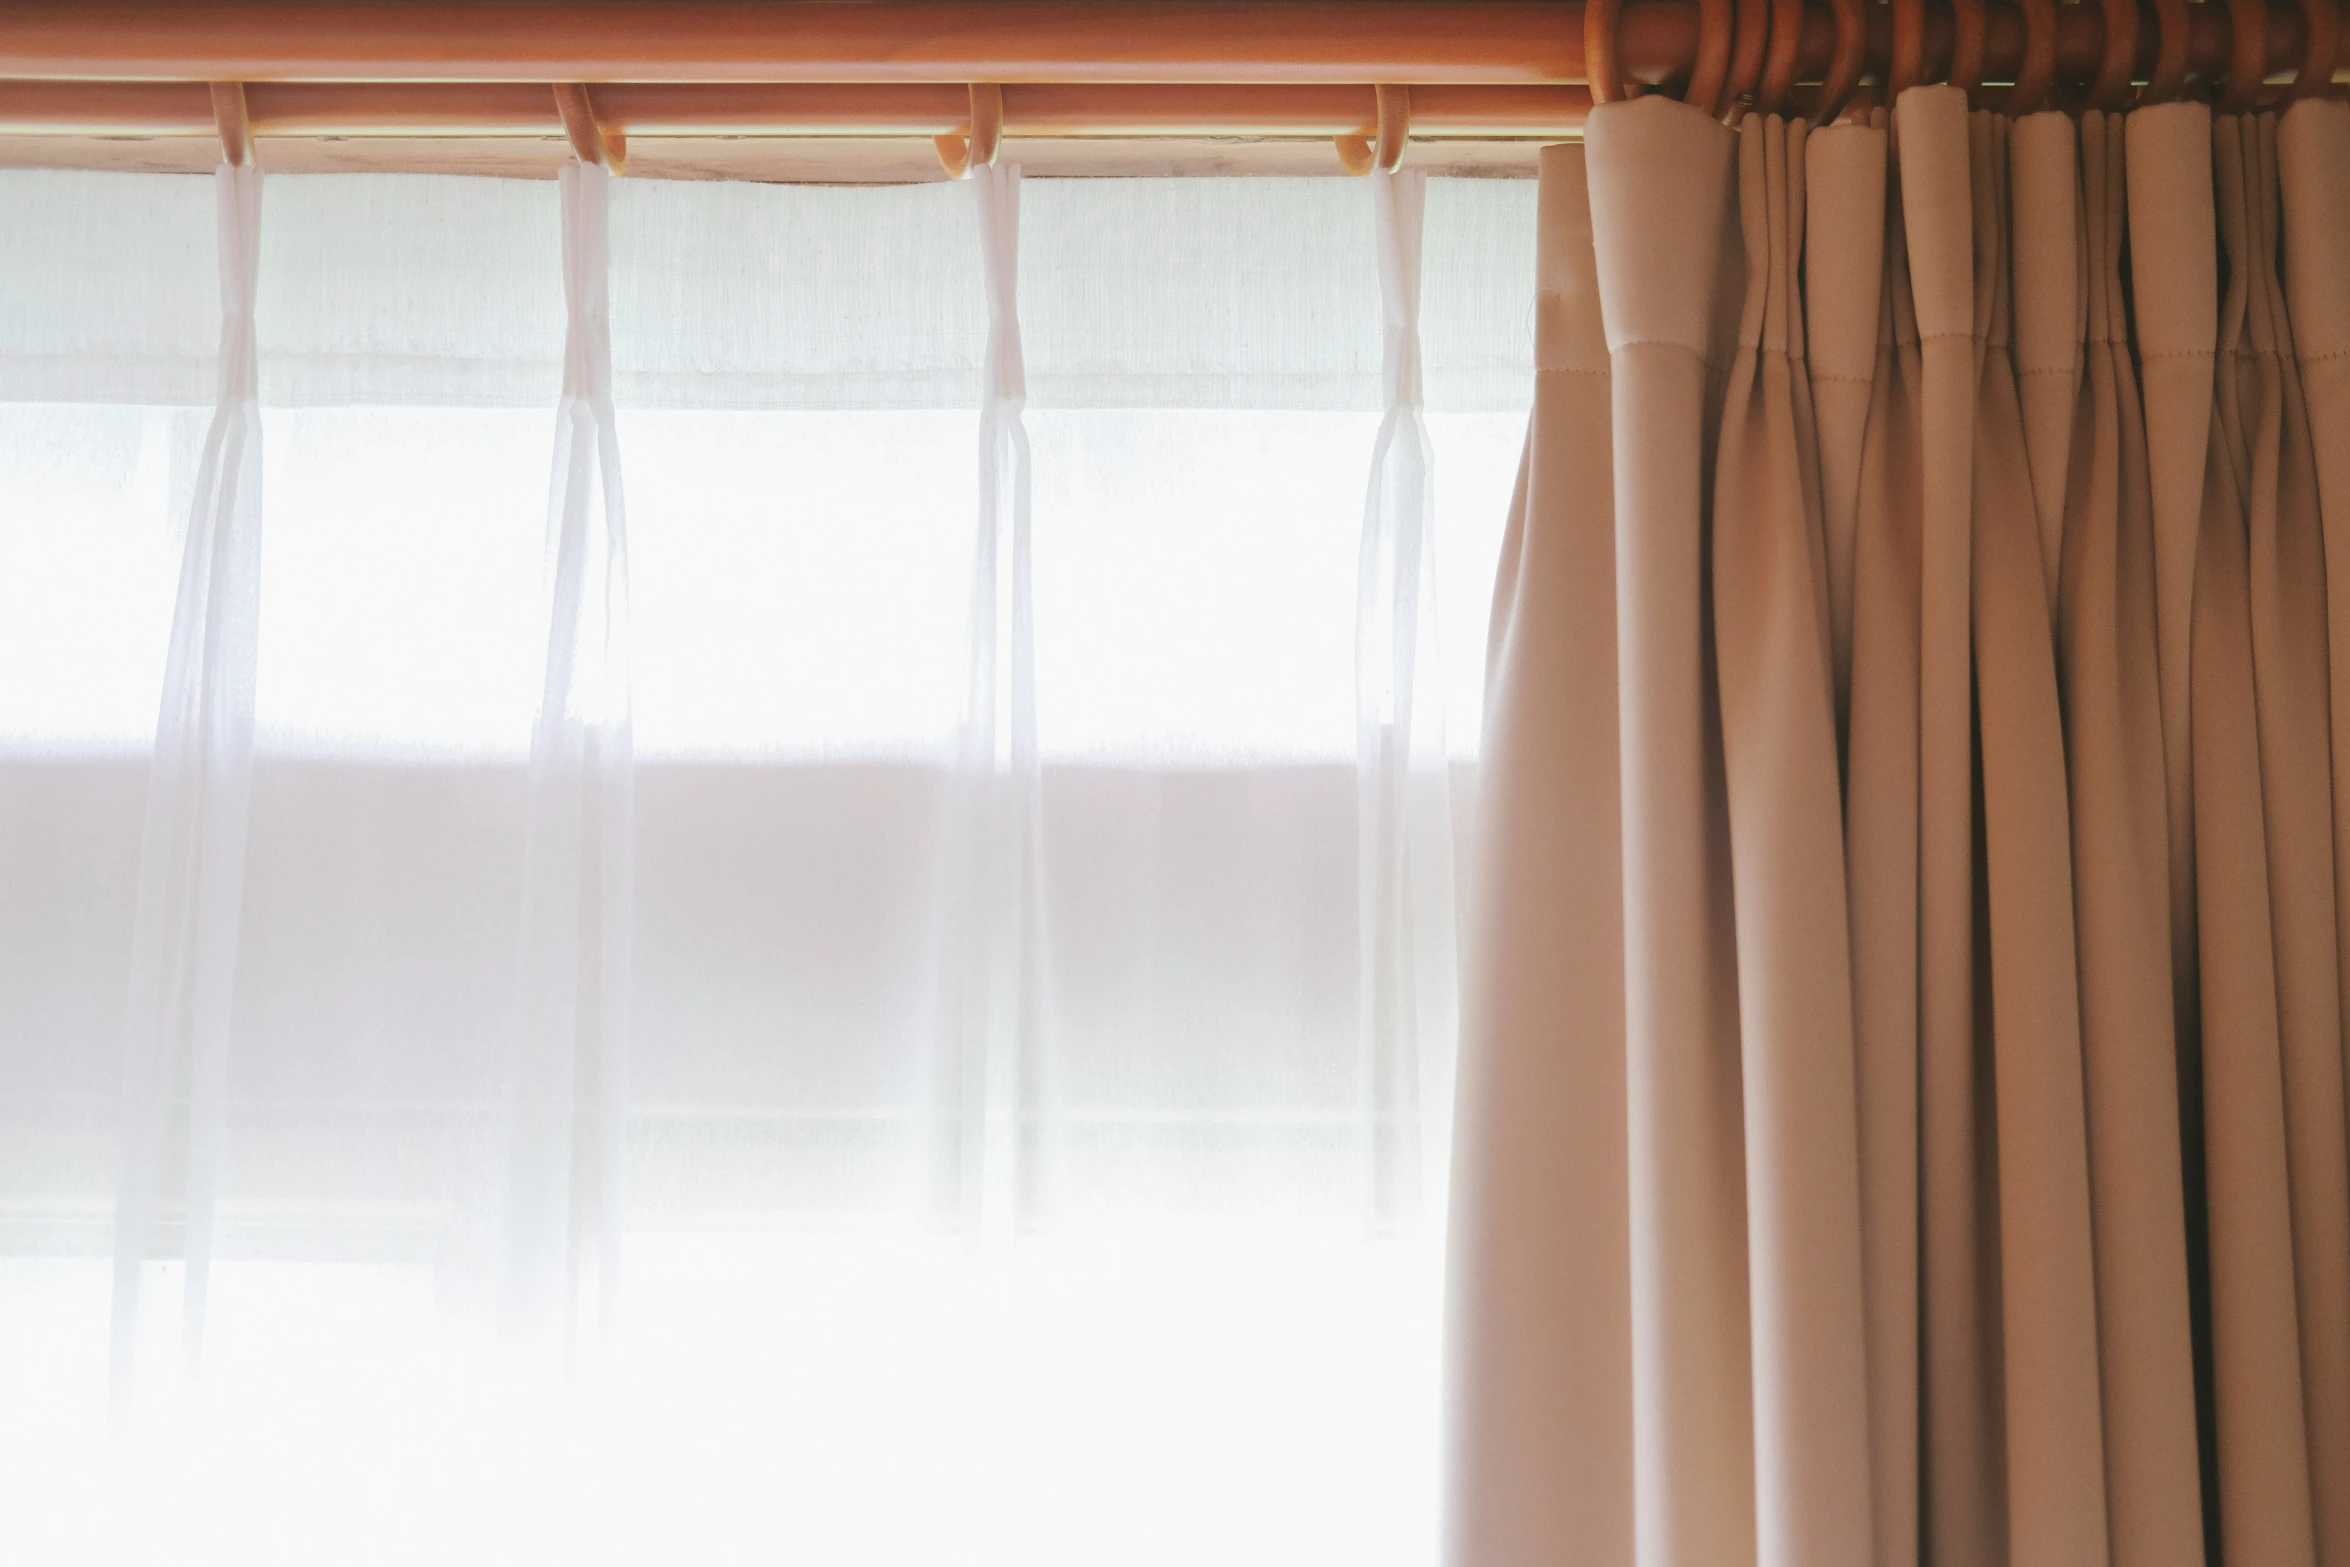 a close up of a window with curtains